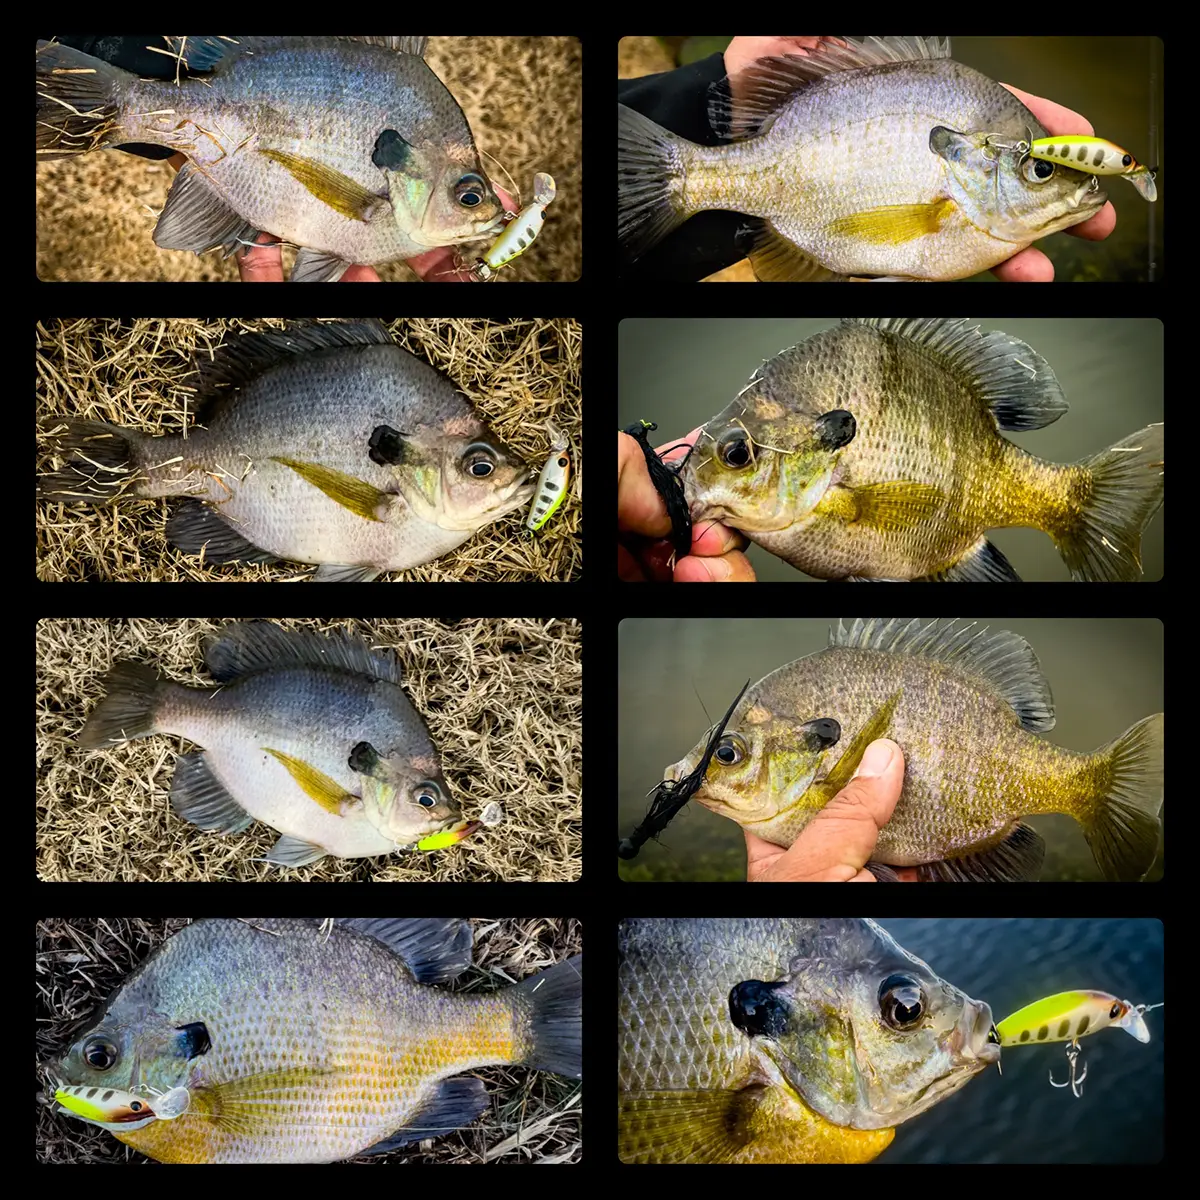 Best Baits for Bluegill Fishing - Wired2Fish